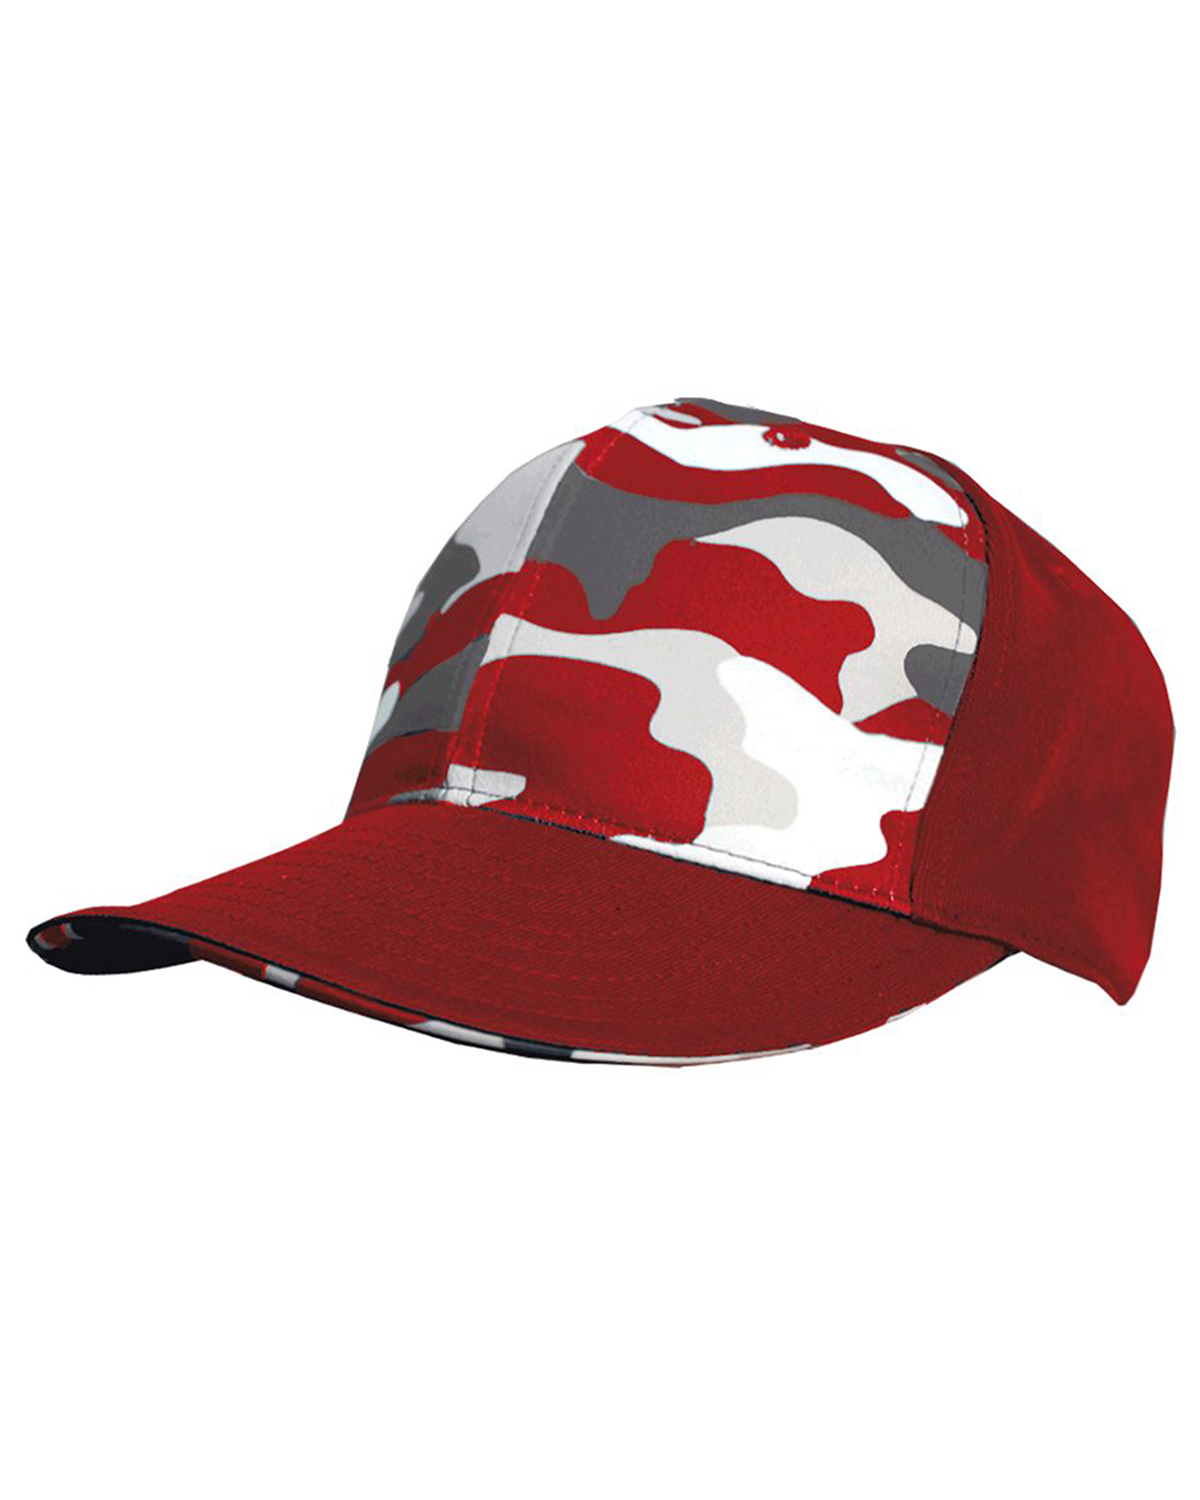 click to view RED/ RED CAMO